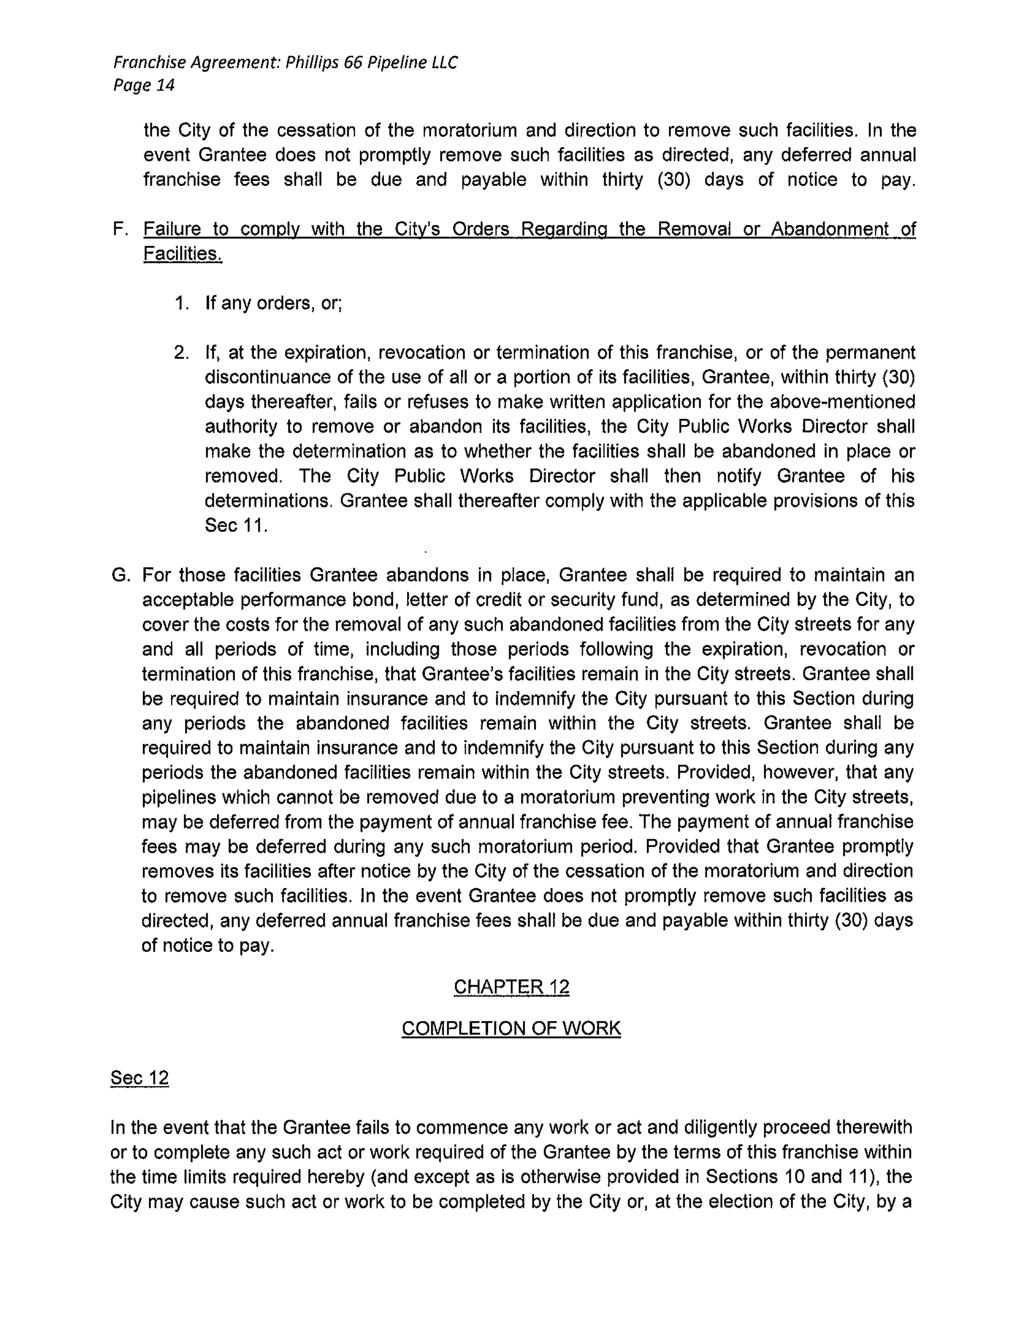 Page 14 the City of the cessation of the moratorium and direction to remove such facilities.